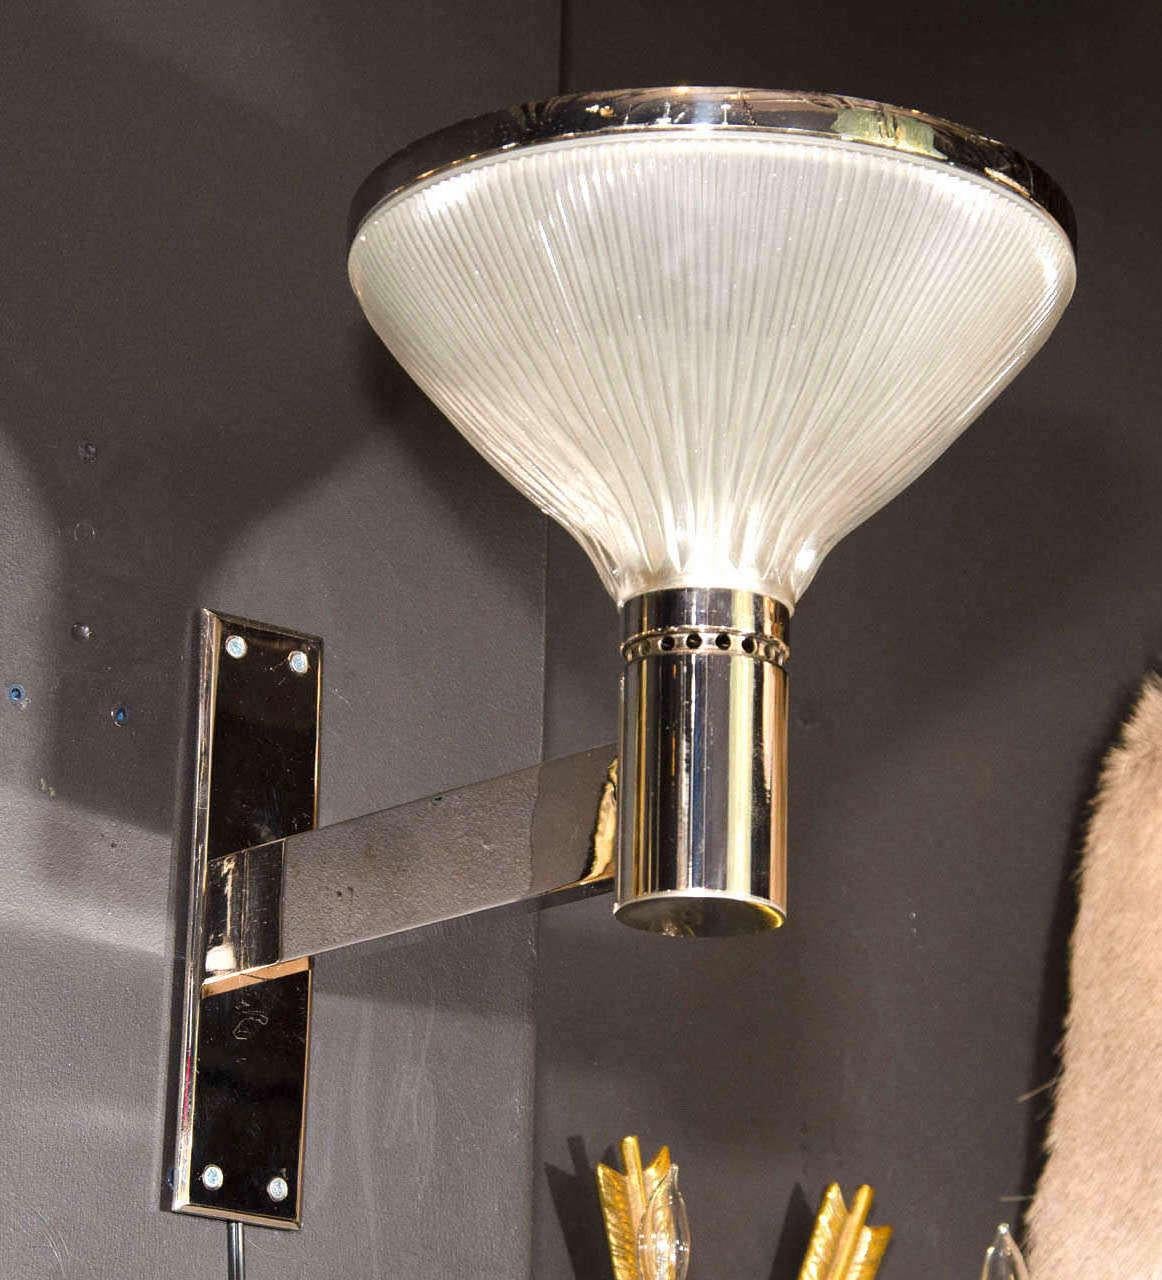 Mid-Century Modern torchiere uplight sconces with Art Deco and Machine Age inspired design. They feature bold polished chrome frames with extended arm design and fluted opaline glass domes with chrome banded tops. Sconces have a prominent design and